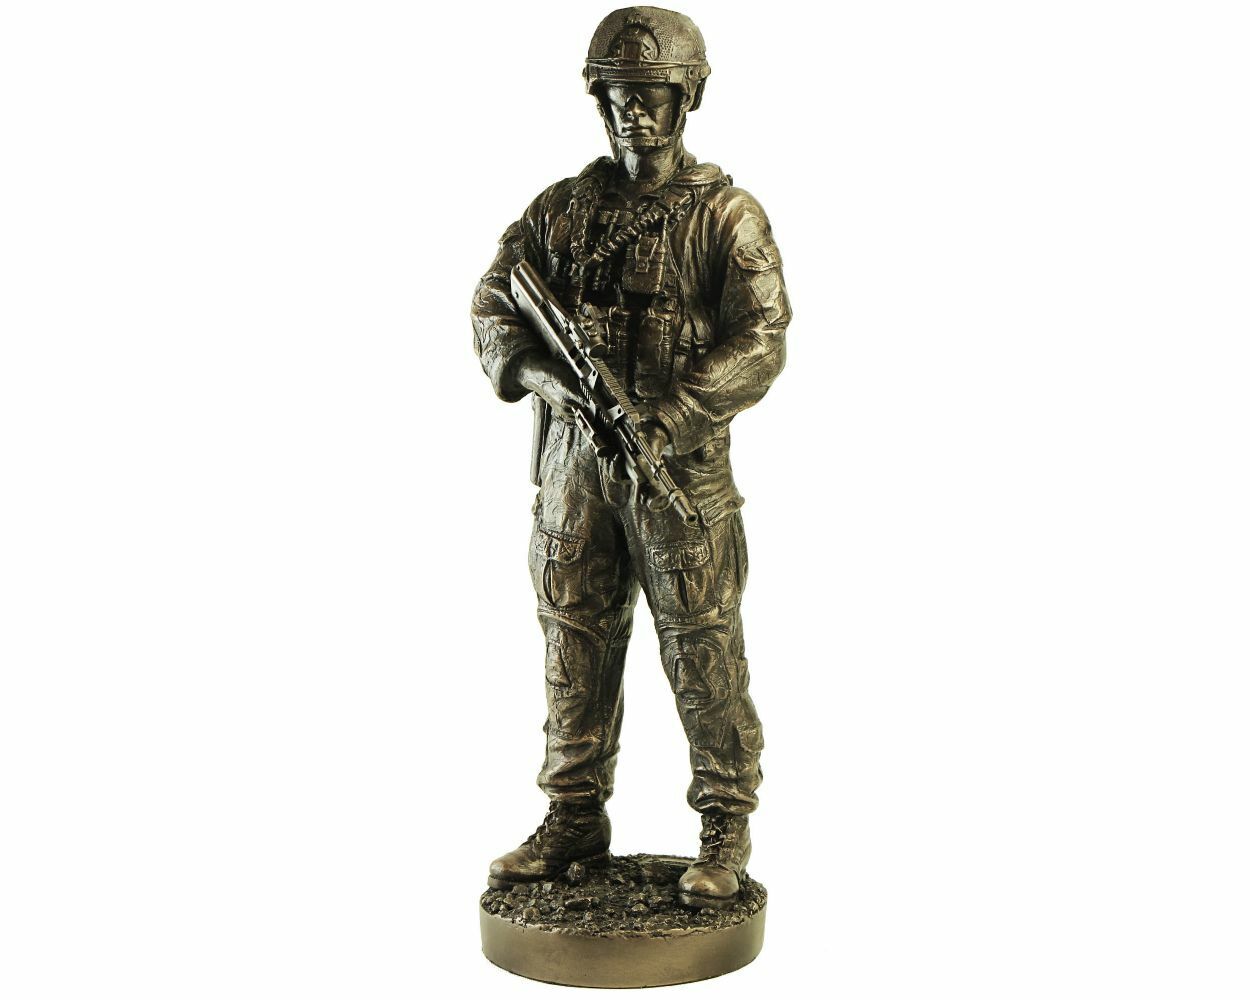 PLATATAC Naked Army RAR 2021 modern digger statue ideal for fathers day